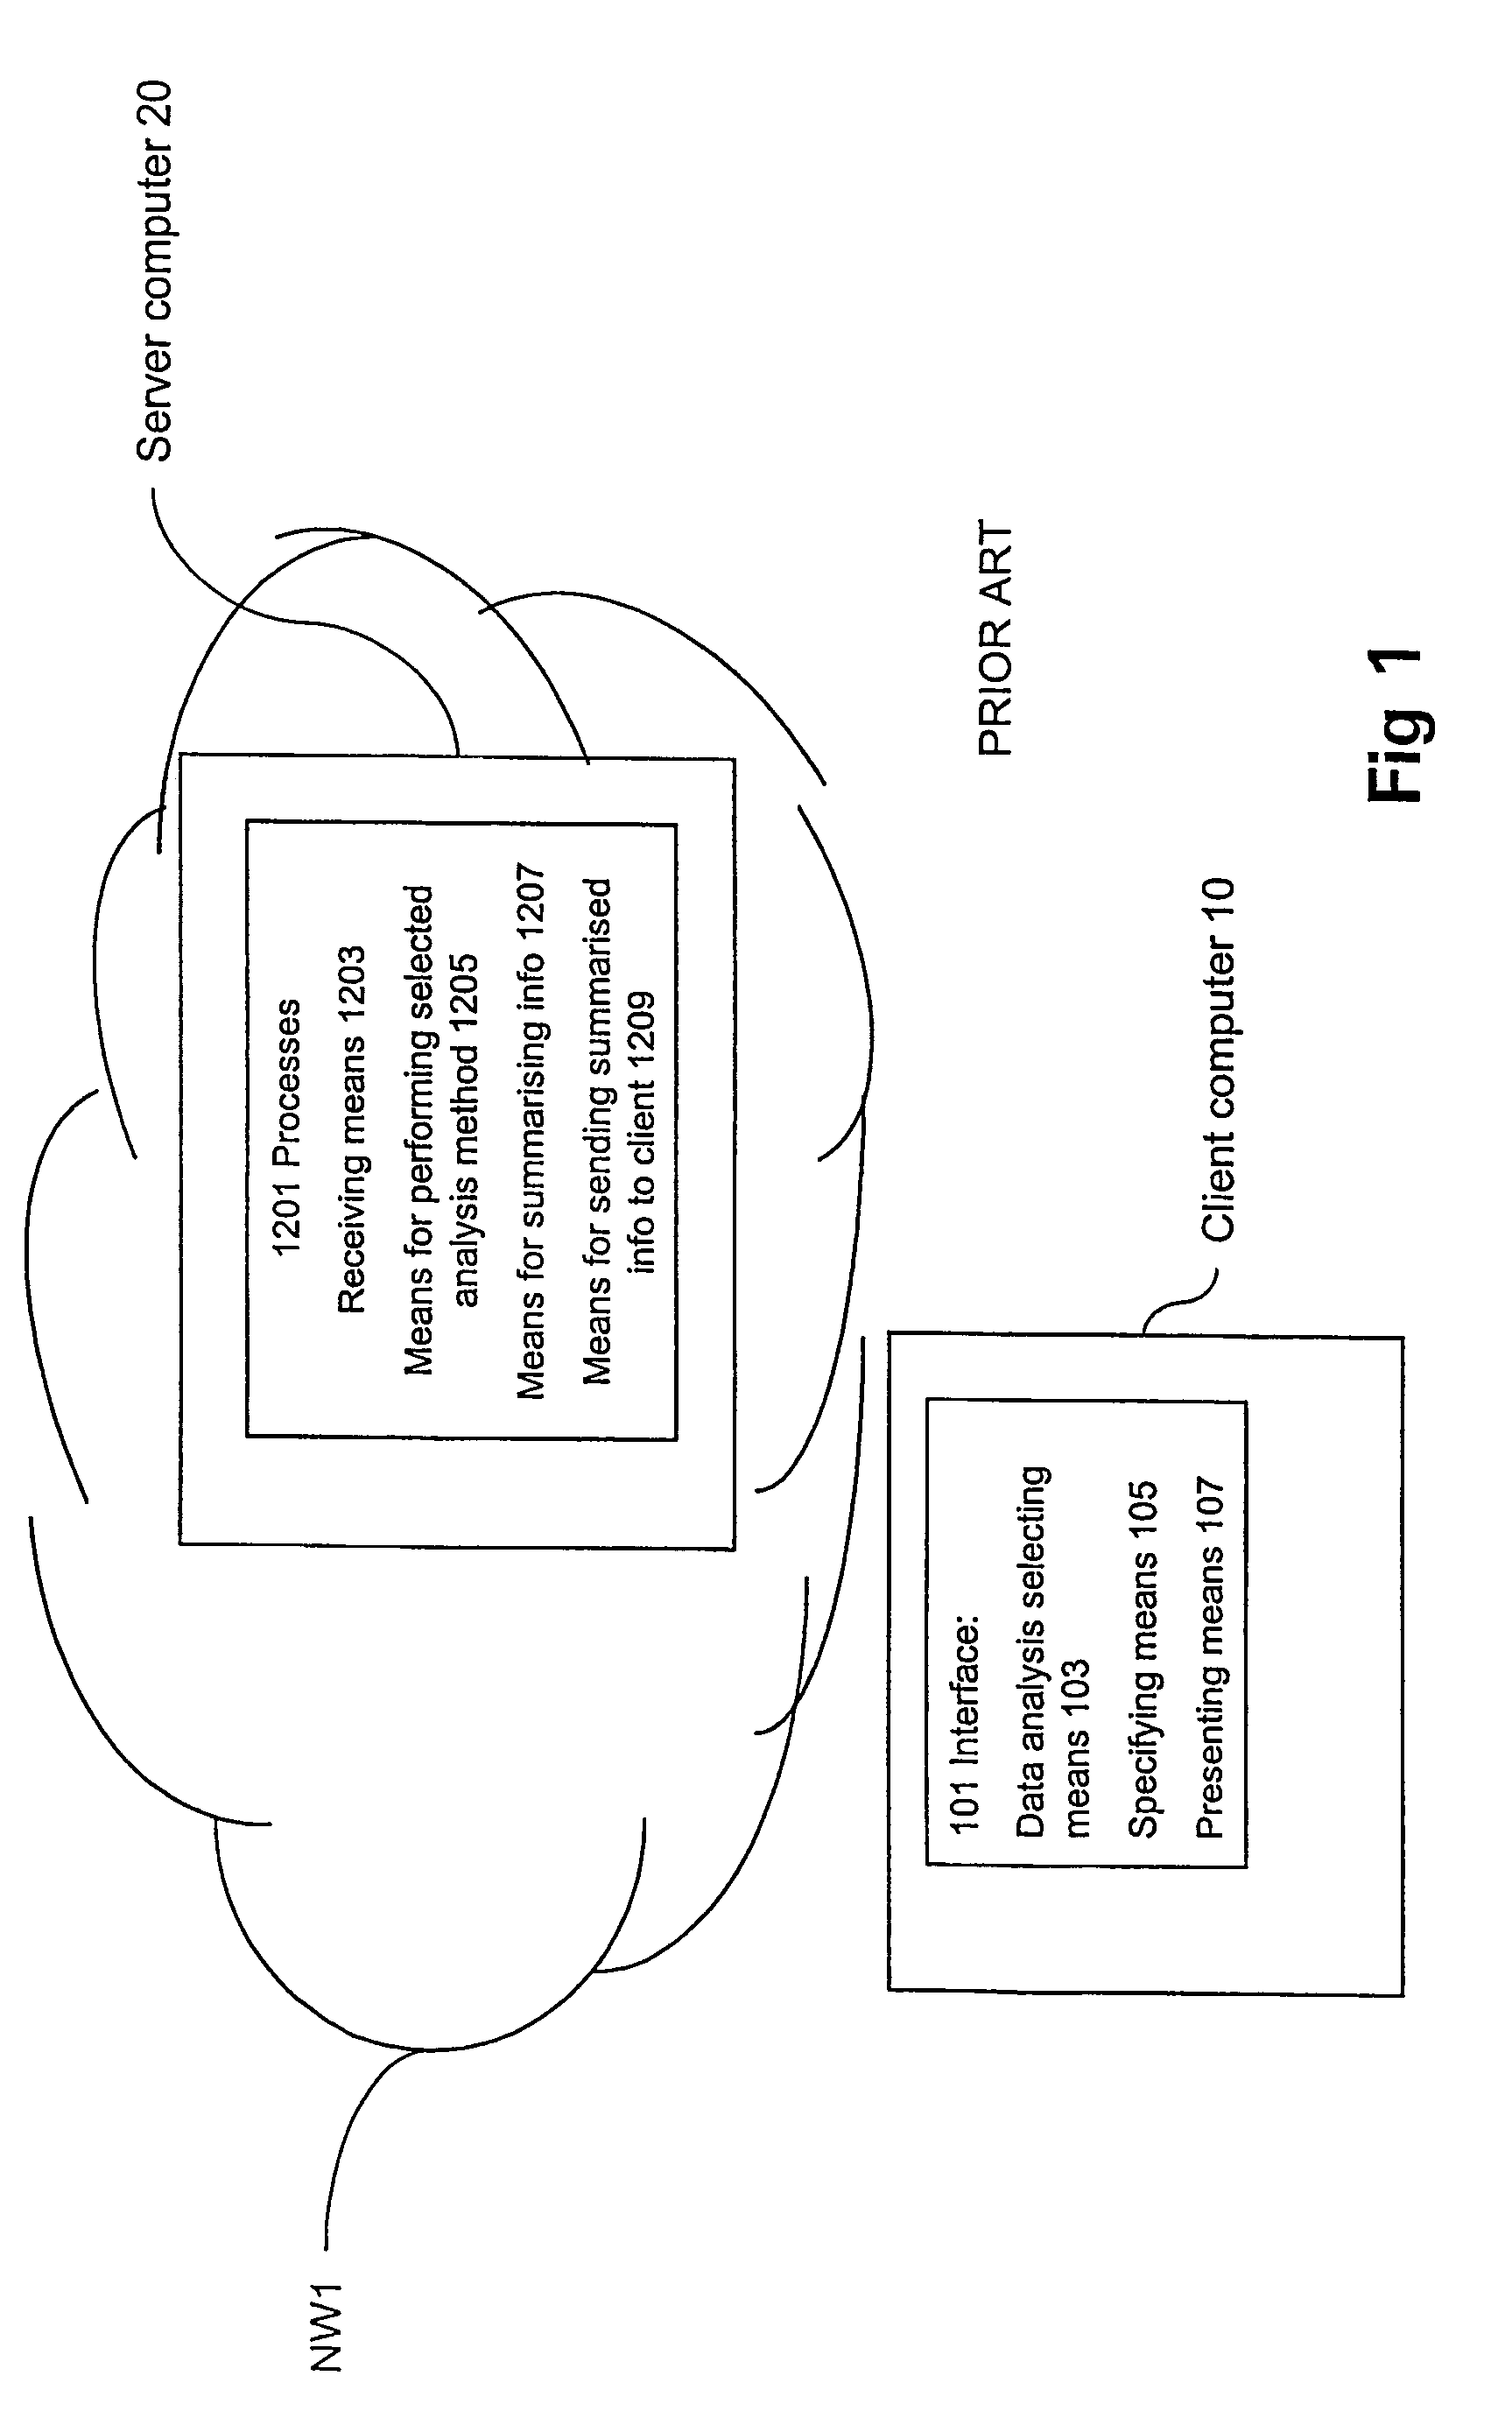 Method and apparatus for data analysis